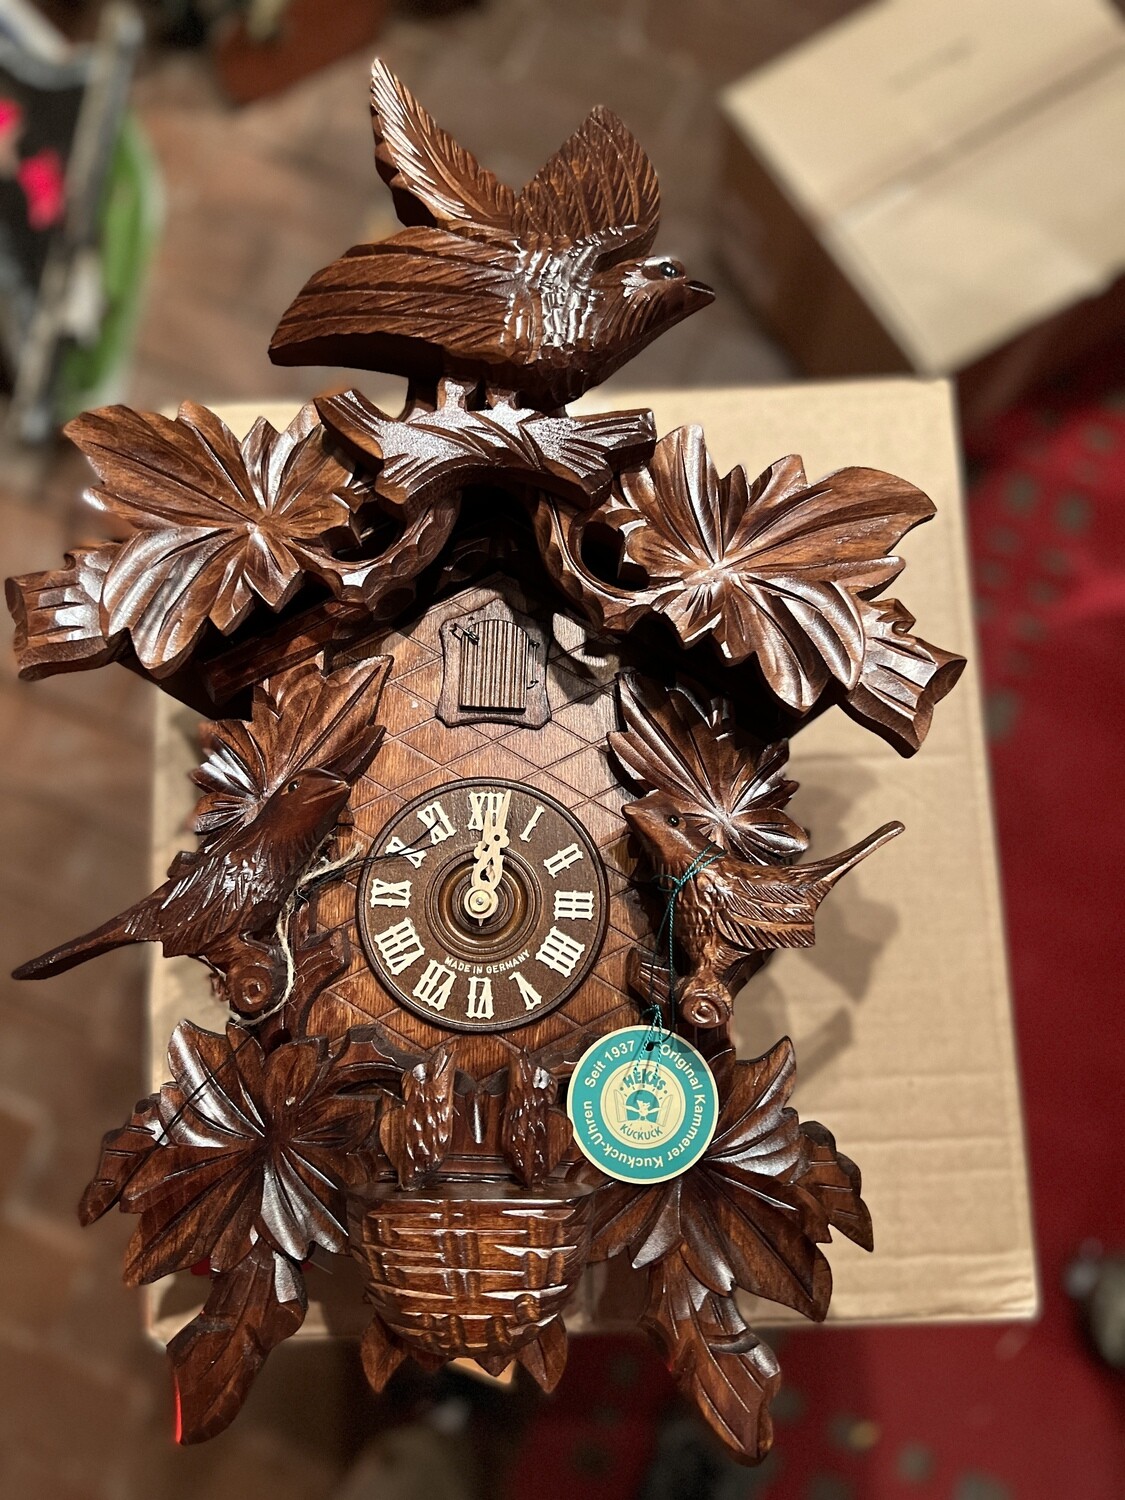 8-Day Carved Cuckoo Clock